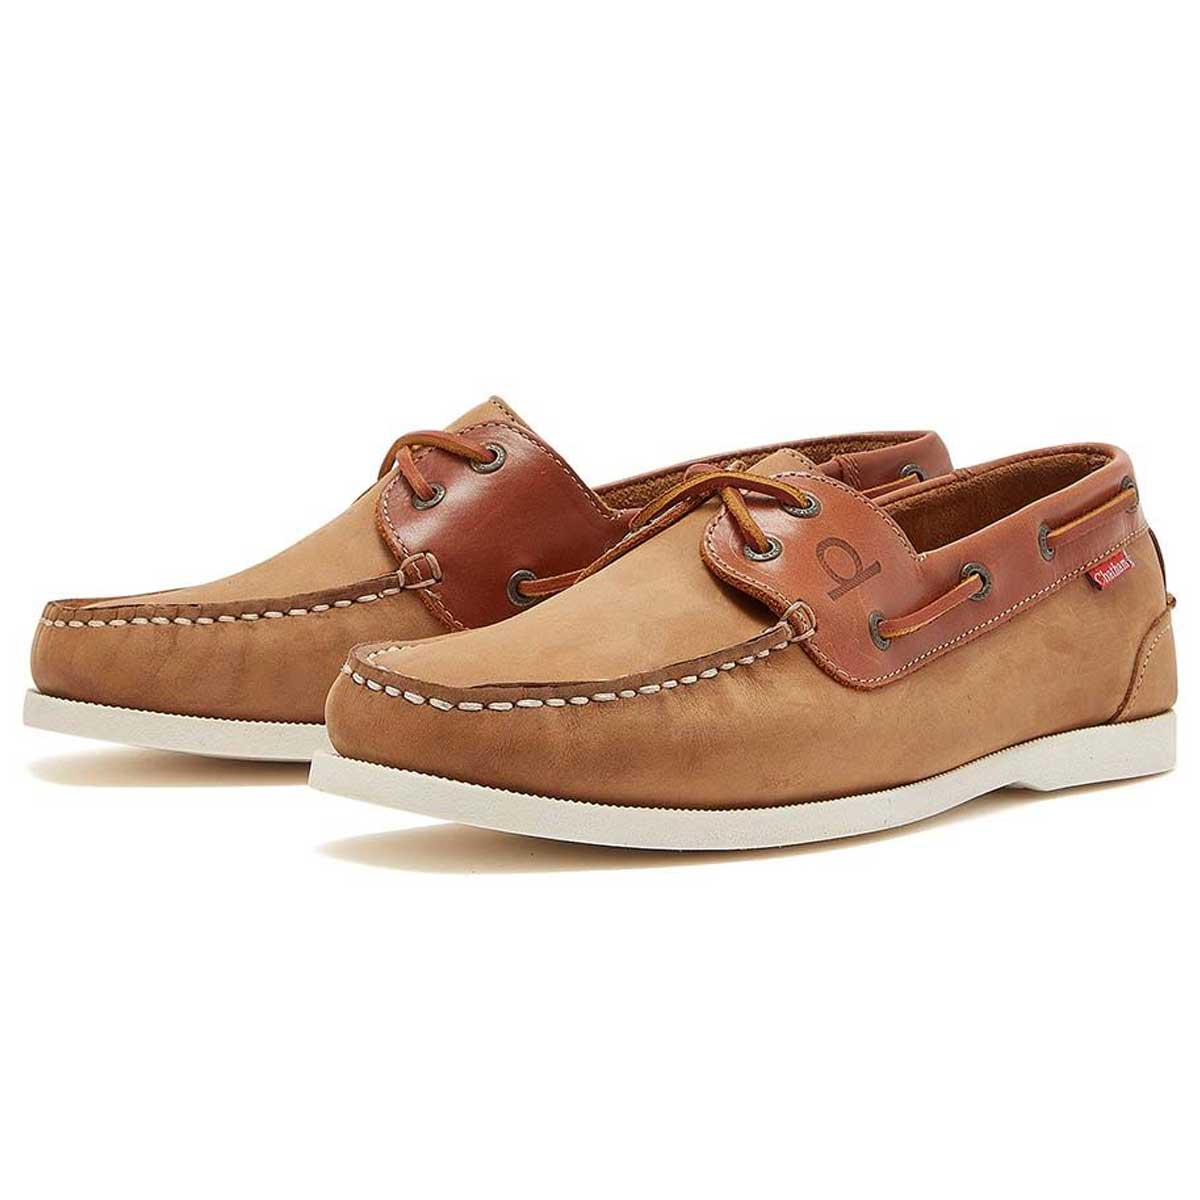 CHATHAM Galley II Leather Boat Shoes - Men's - Tan